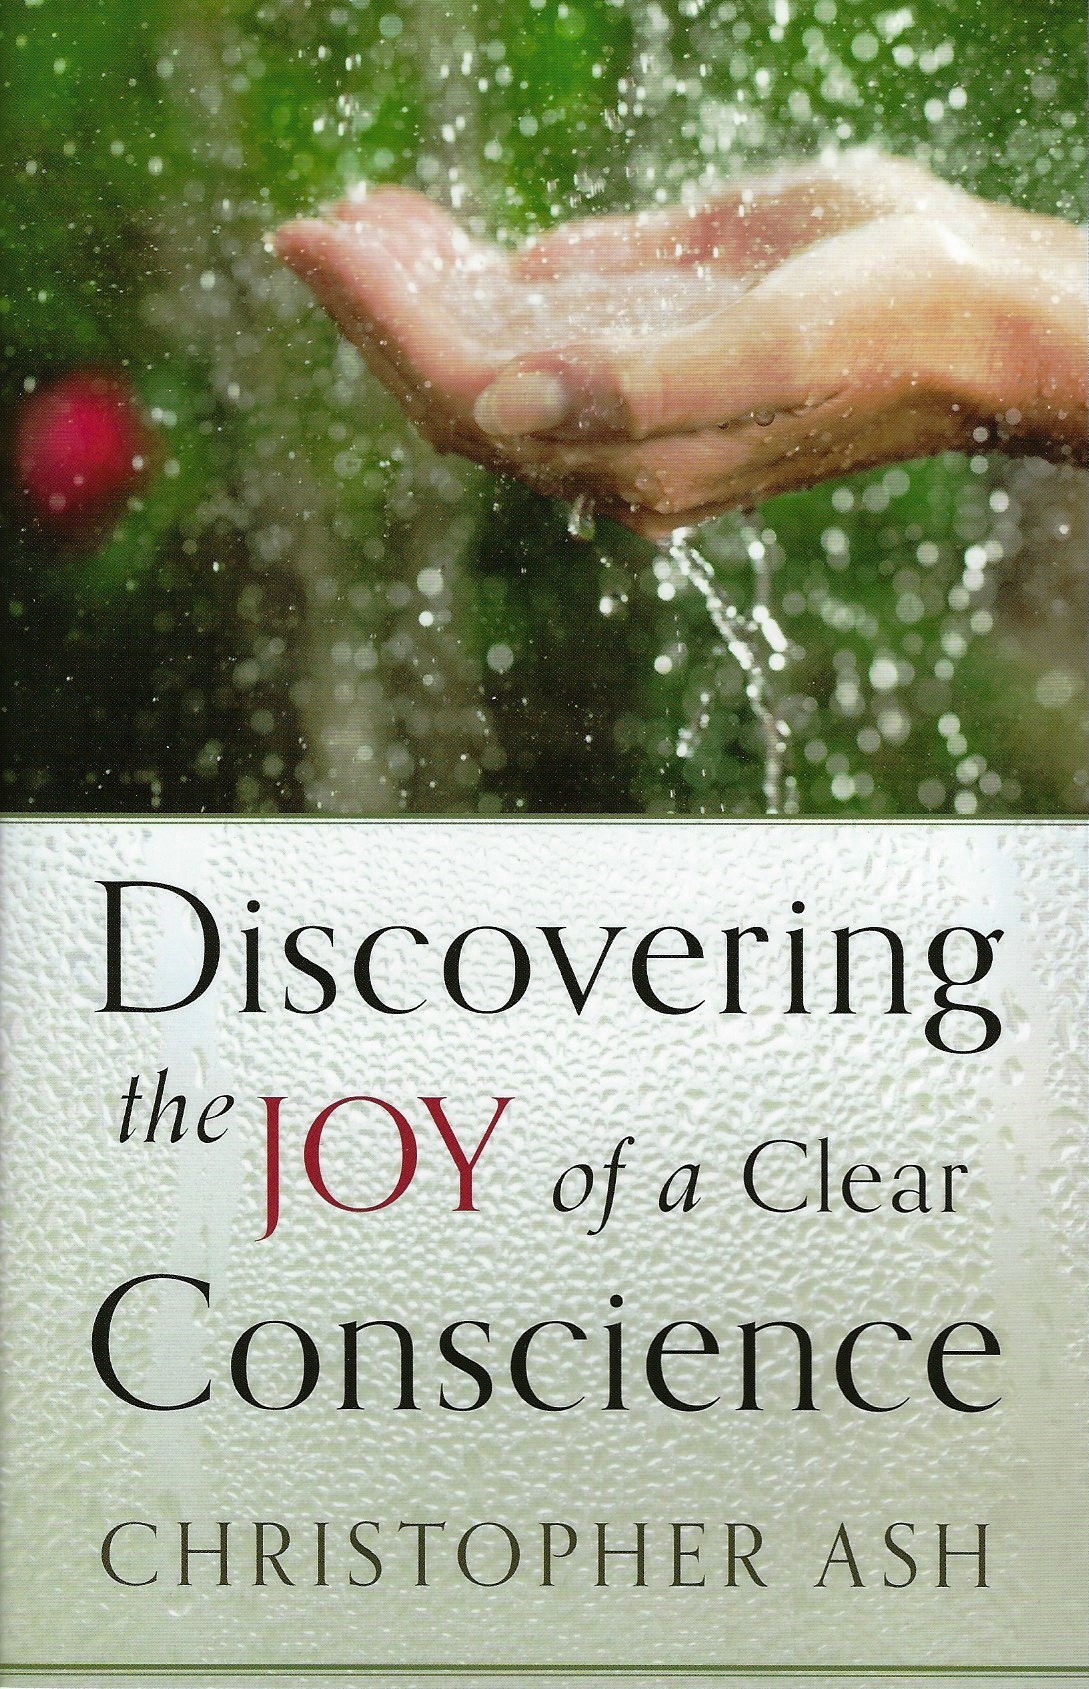 DISCOVERING THE JOY OF A CLEAR CONSCIENCE Christopher Ash